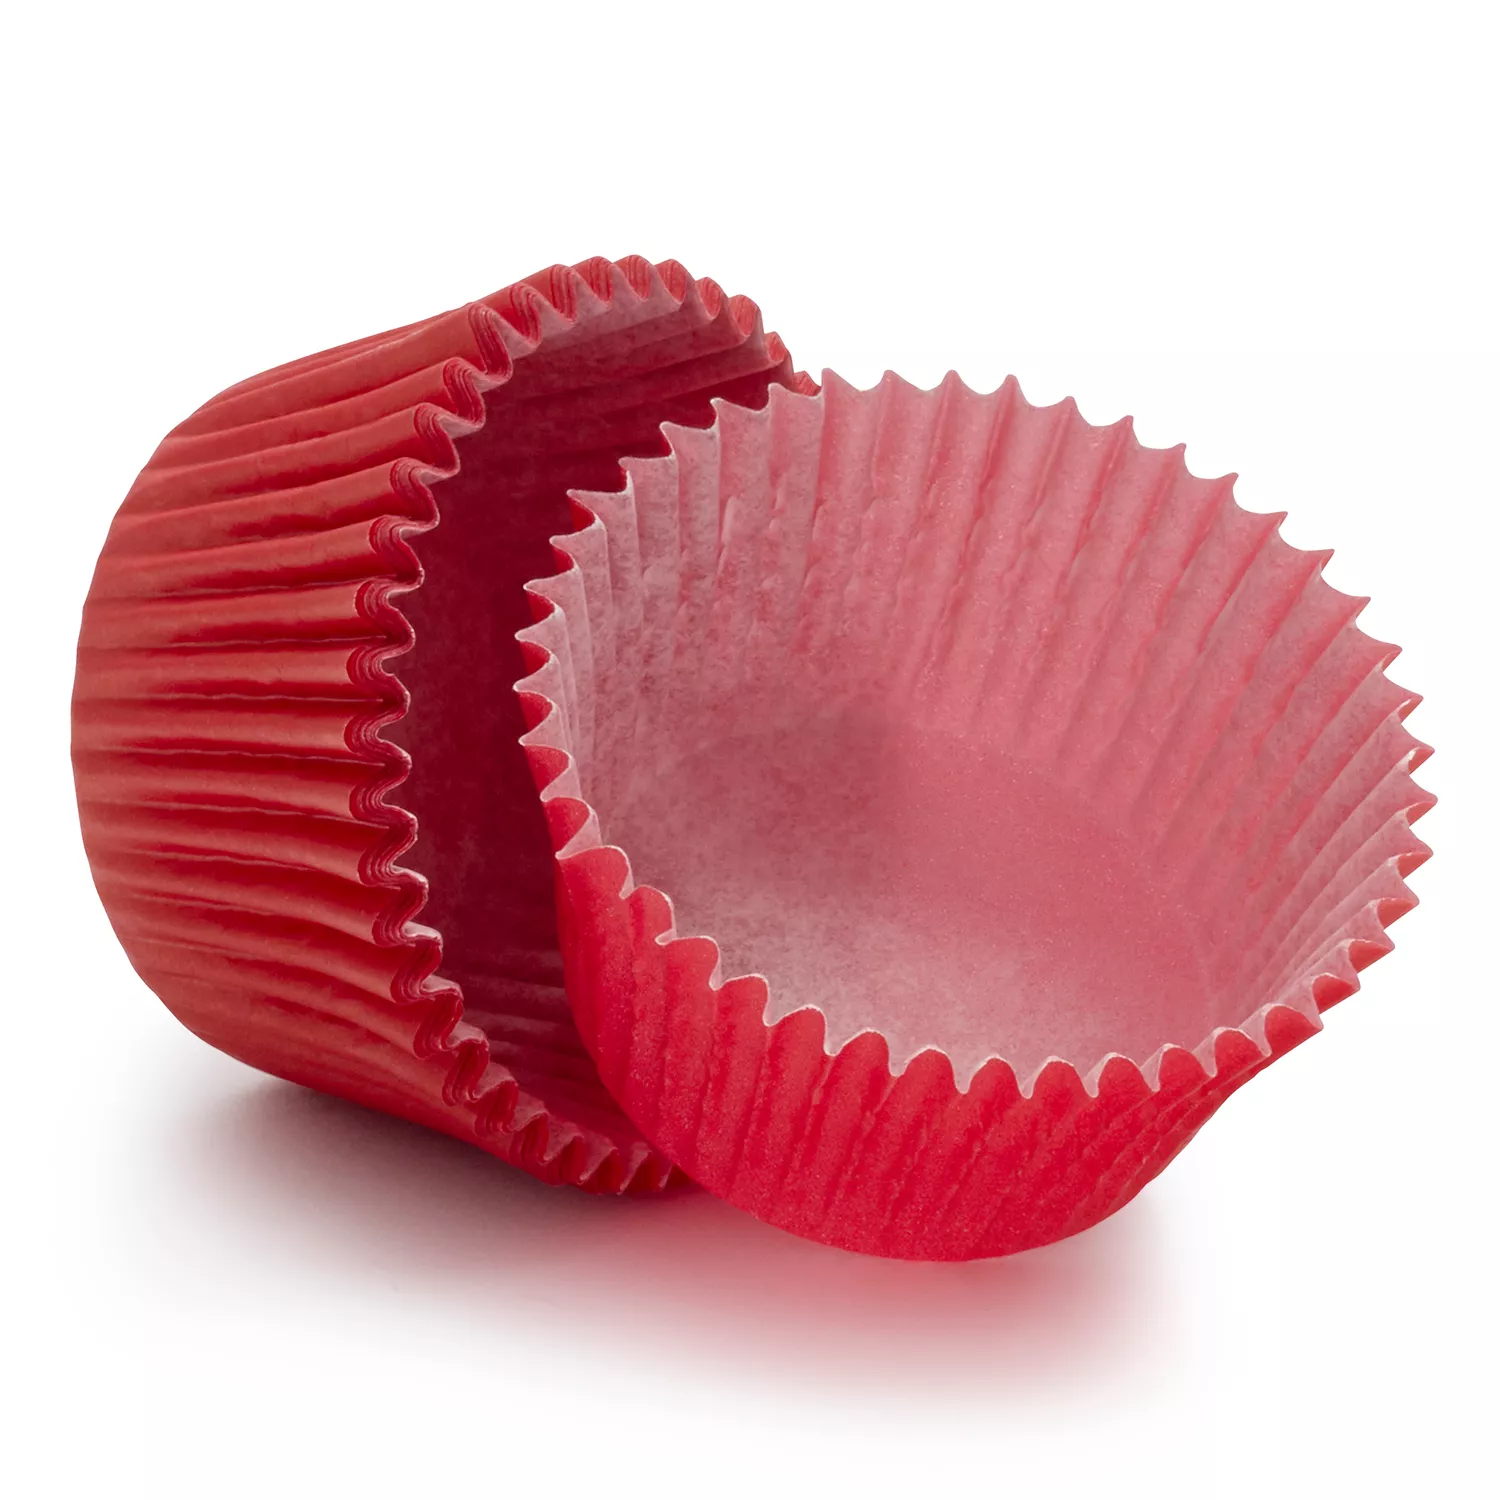 Wilton Dots and Stripes Cupcake Liners, 150-Count